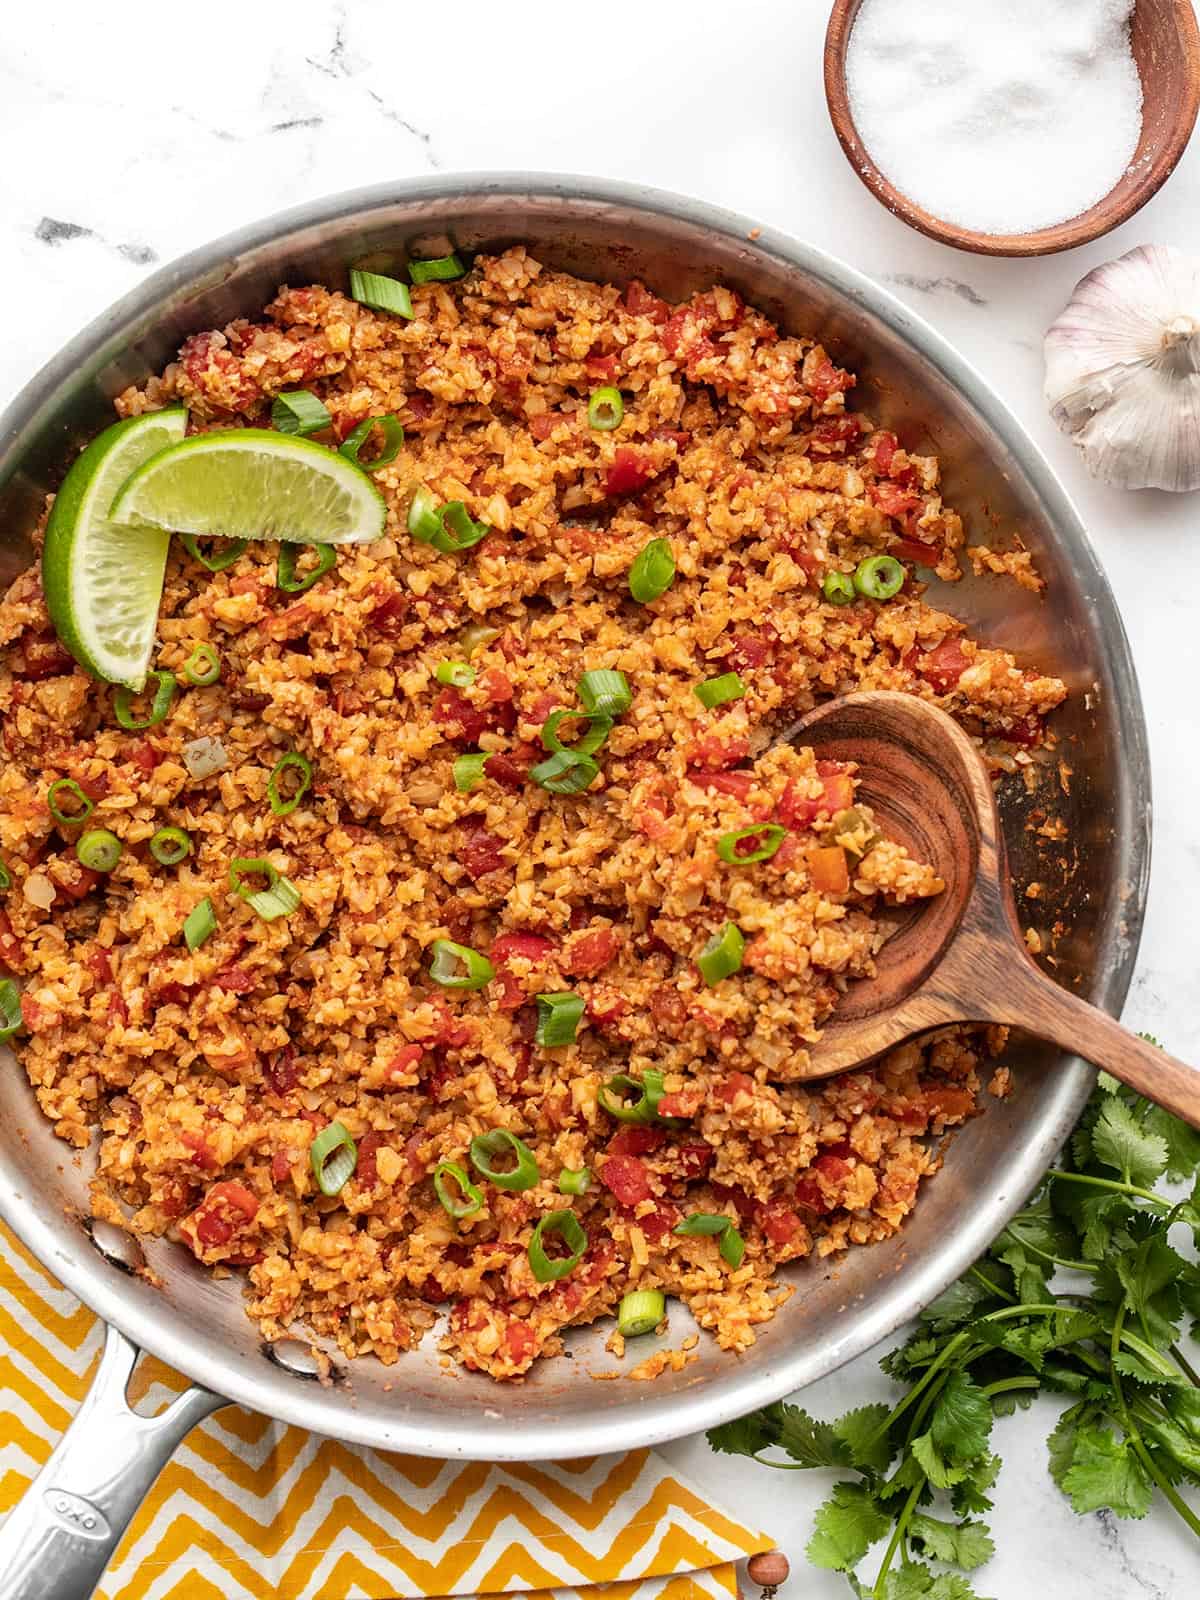 Overhead view of a skillet full of Southwest Cauliflower Rice garnished with lime and a bowl of salt on the side